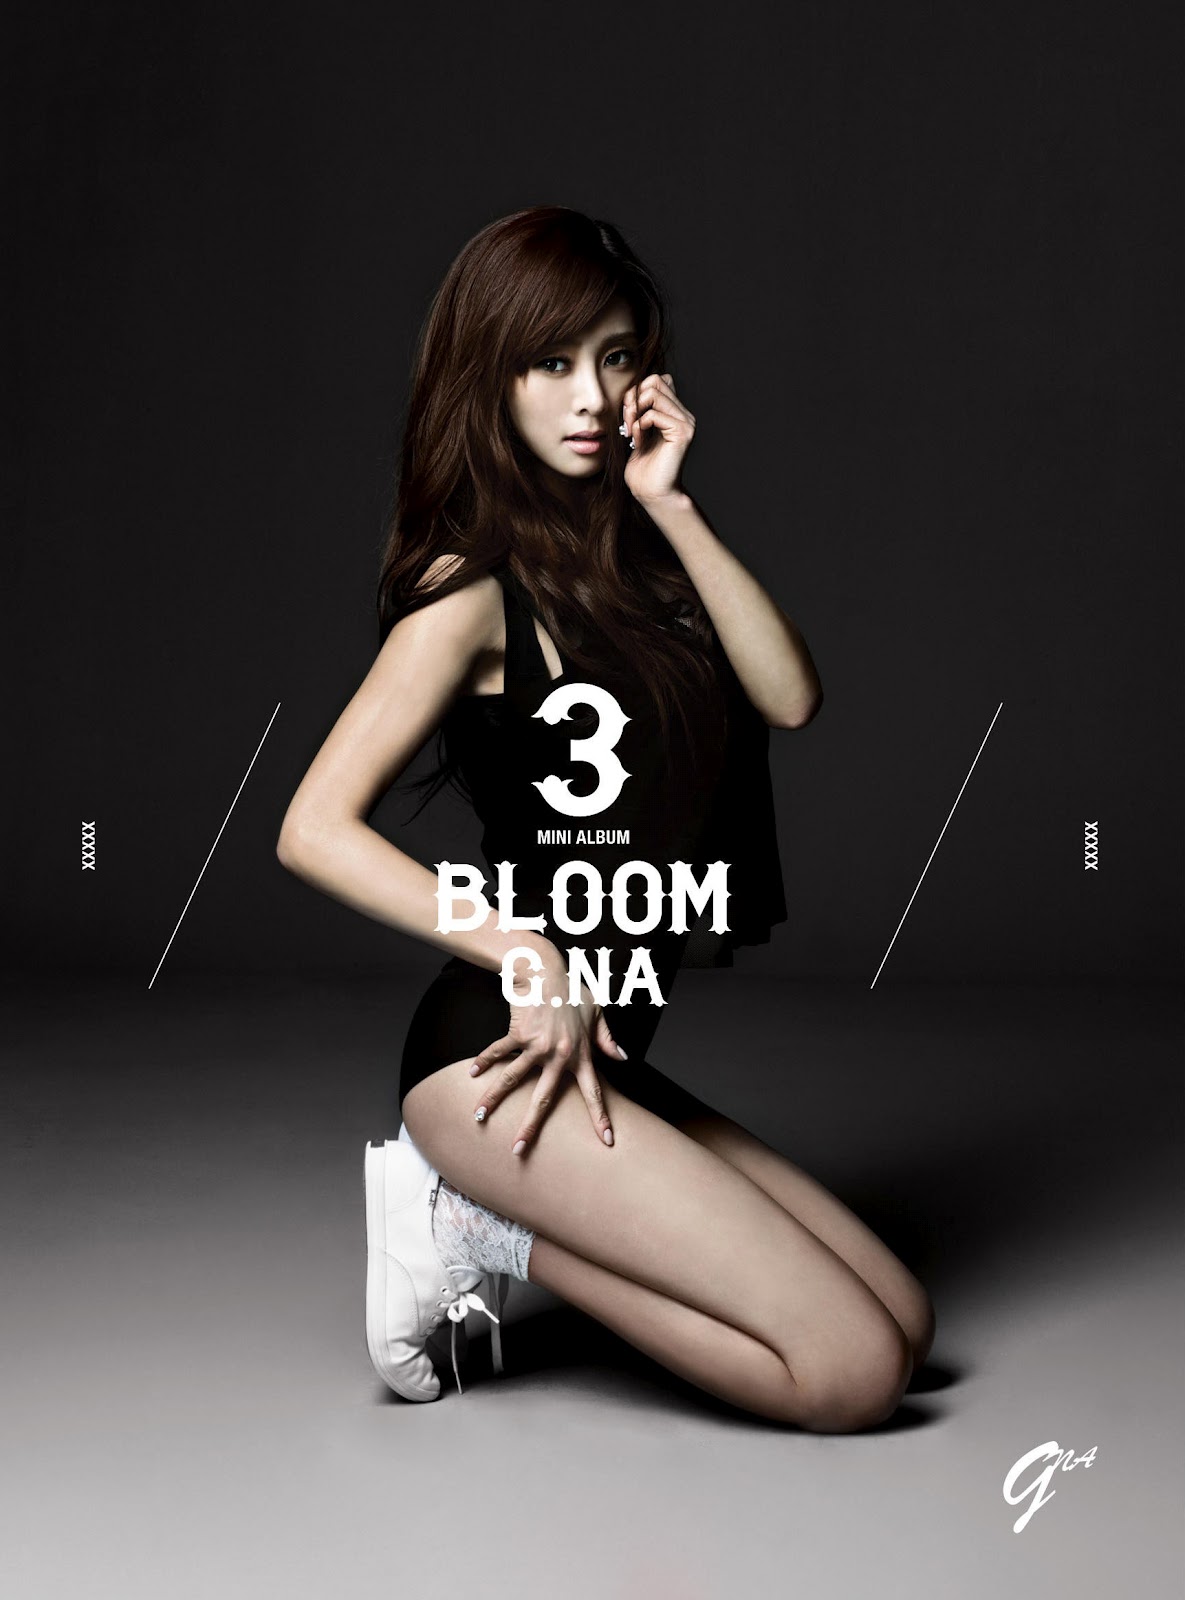 NA (지나) Bloom 2HOT Wallpaper + Photos / Pictures (이미지)